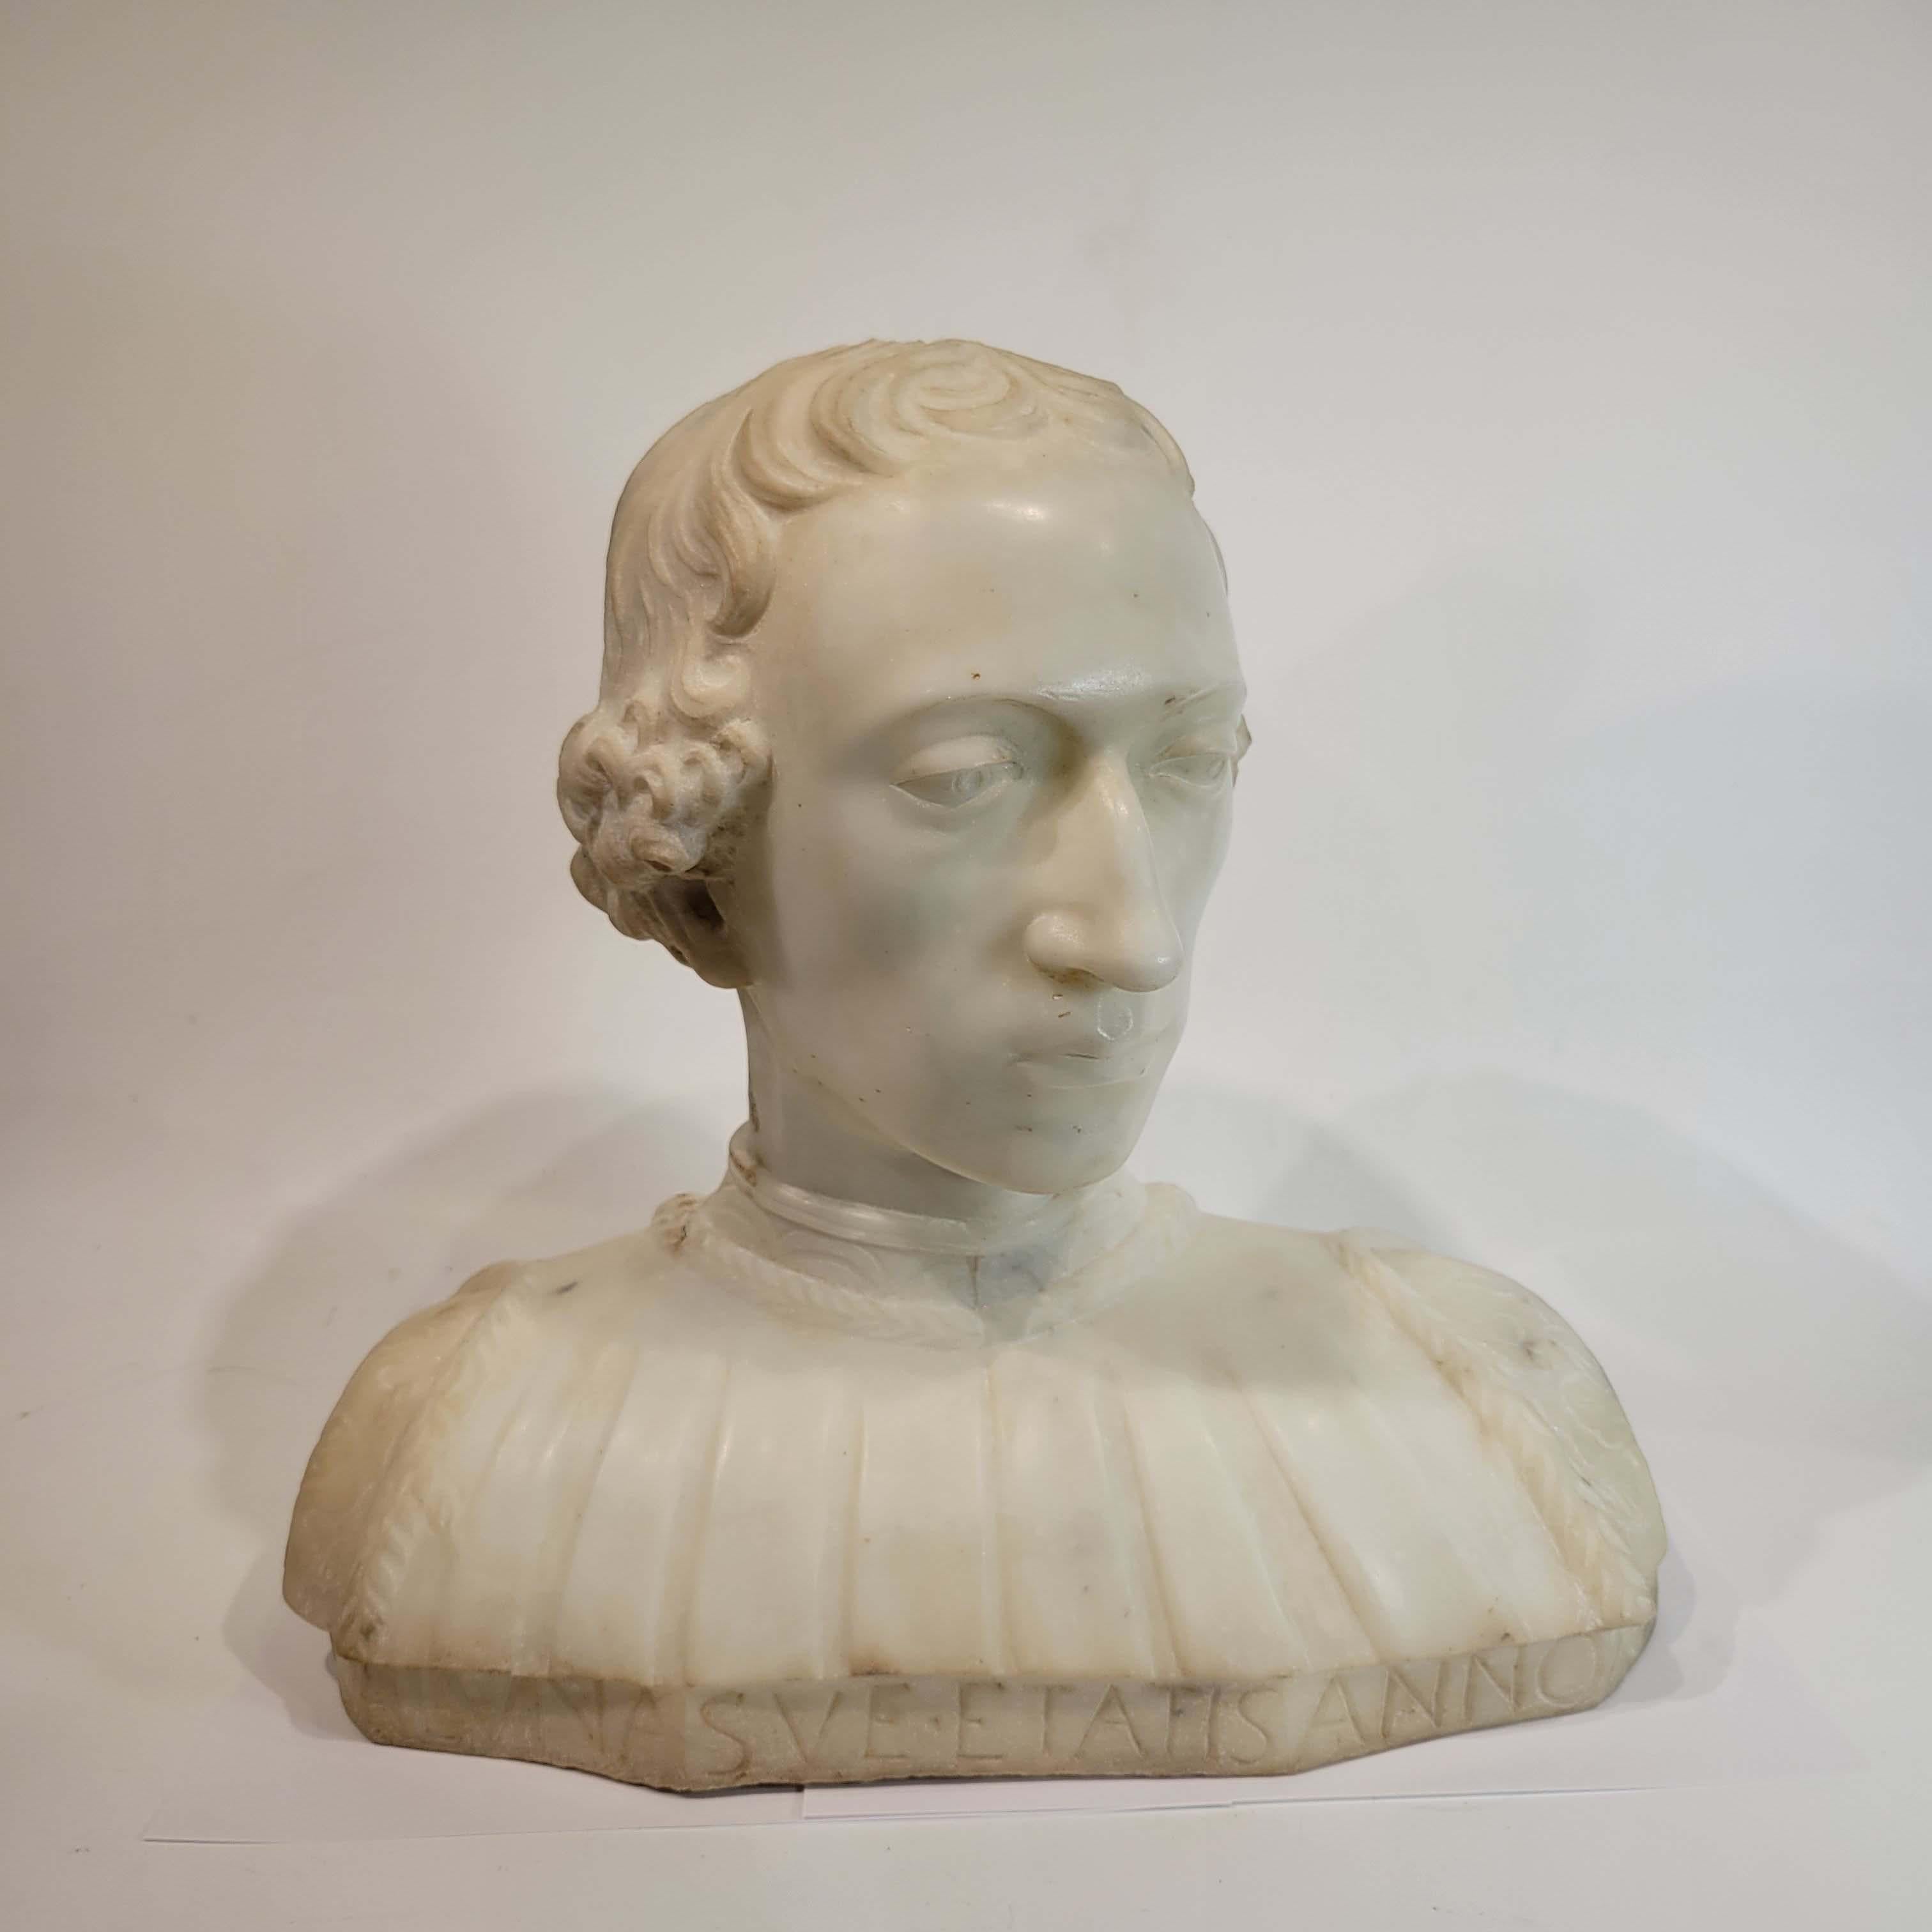 Carved marble bust of Rinaldo della Luna at the age of 27 After  Mino da Fiesole in Florence in 1461. The della Luna family were renowned as men of letters and humanists in Florence during the renaissance. Mino da Fiesole (or Mino di Giovanni)(ca.